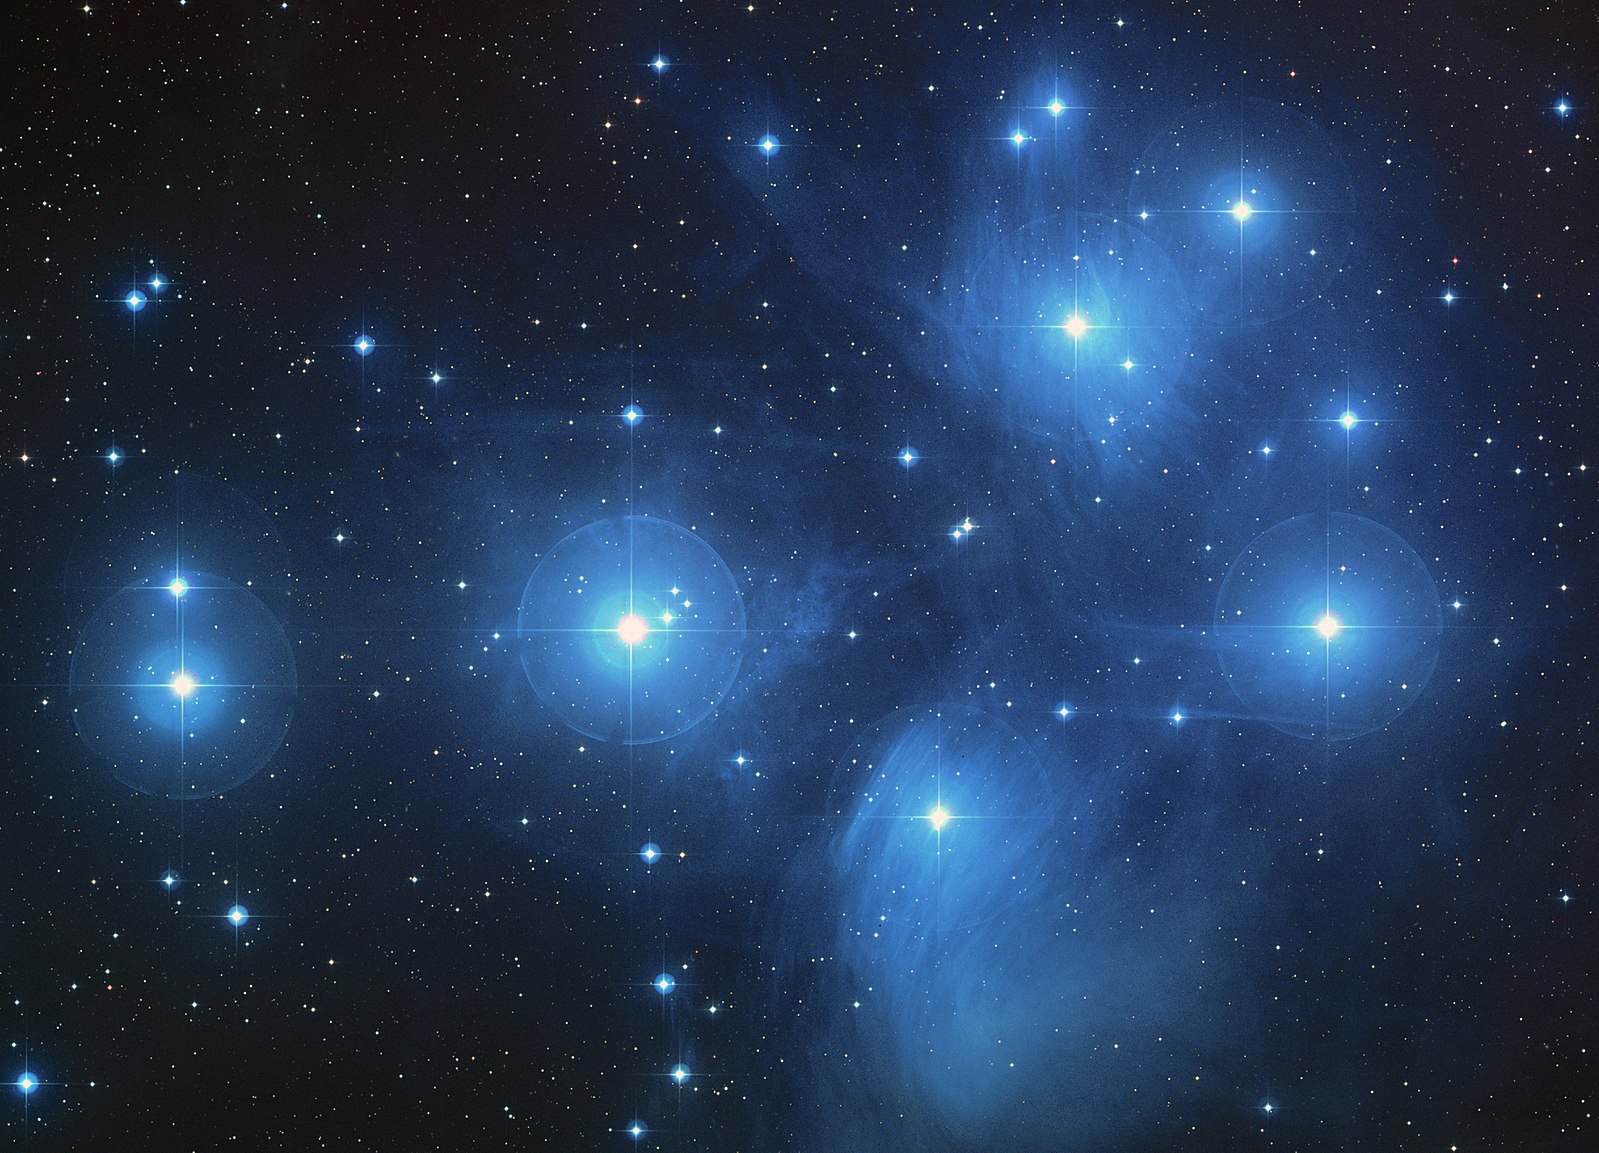 This is an image of the Pleiades star cluster. You can see in this image faint clouds of bluish nebulae and dozens of bright stars scattered in the distance.